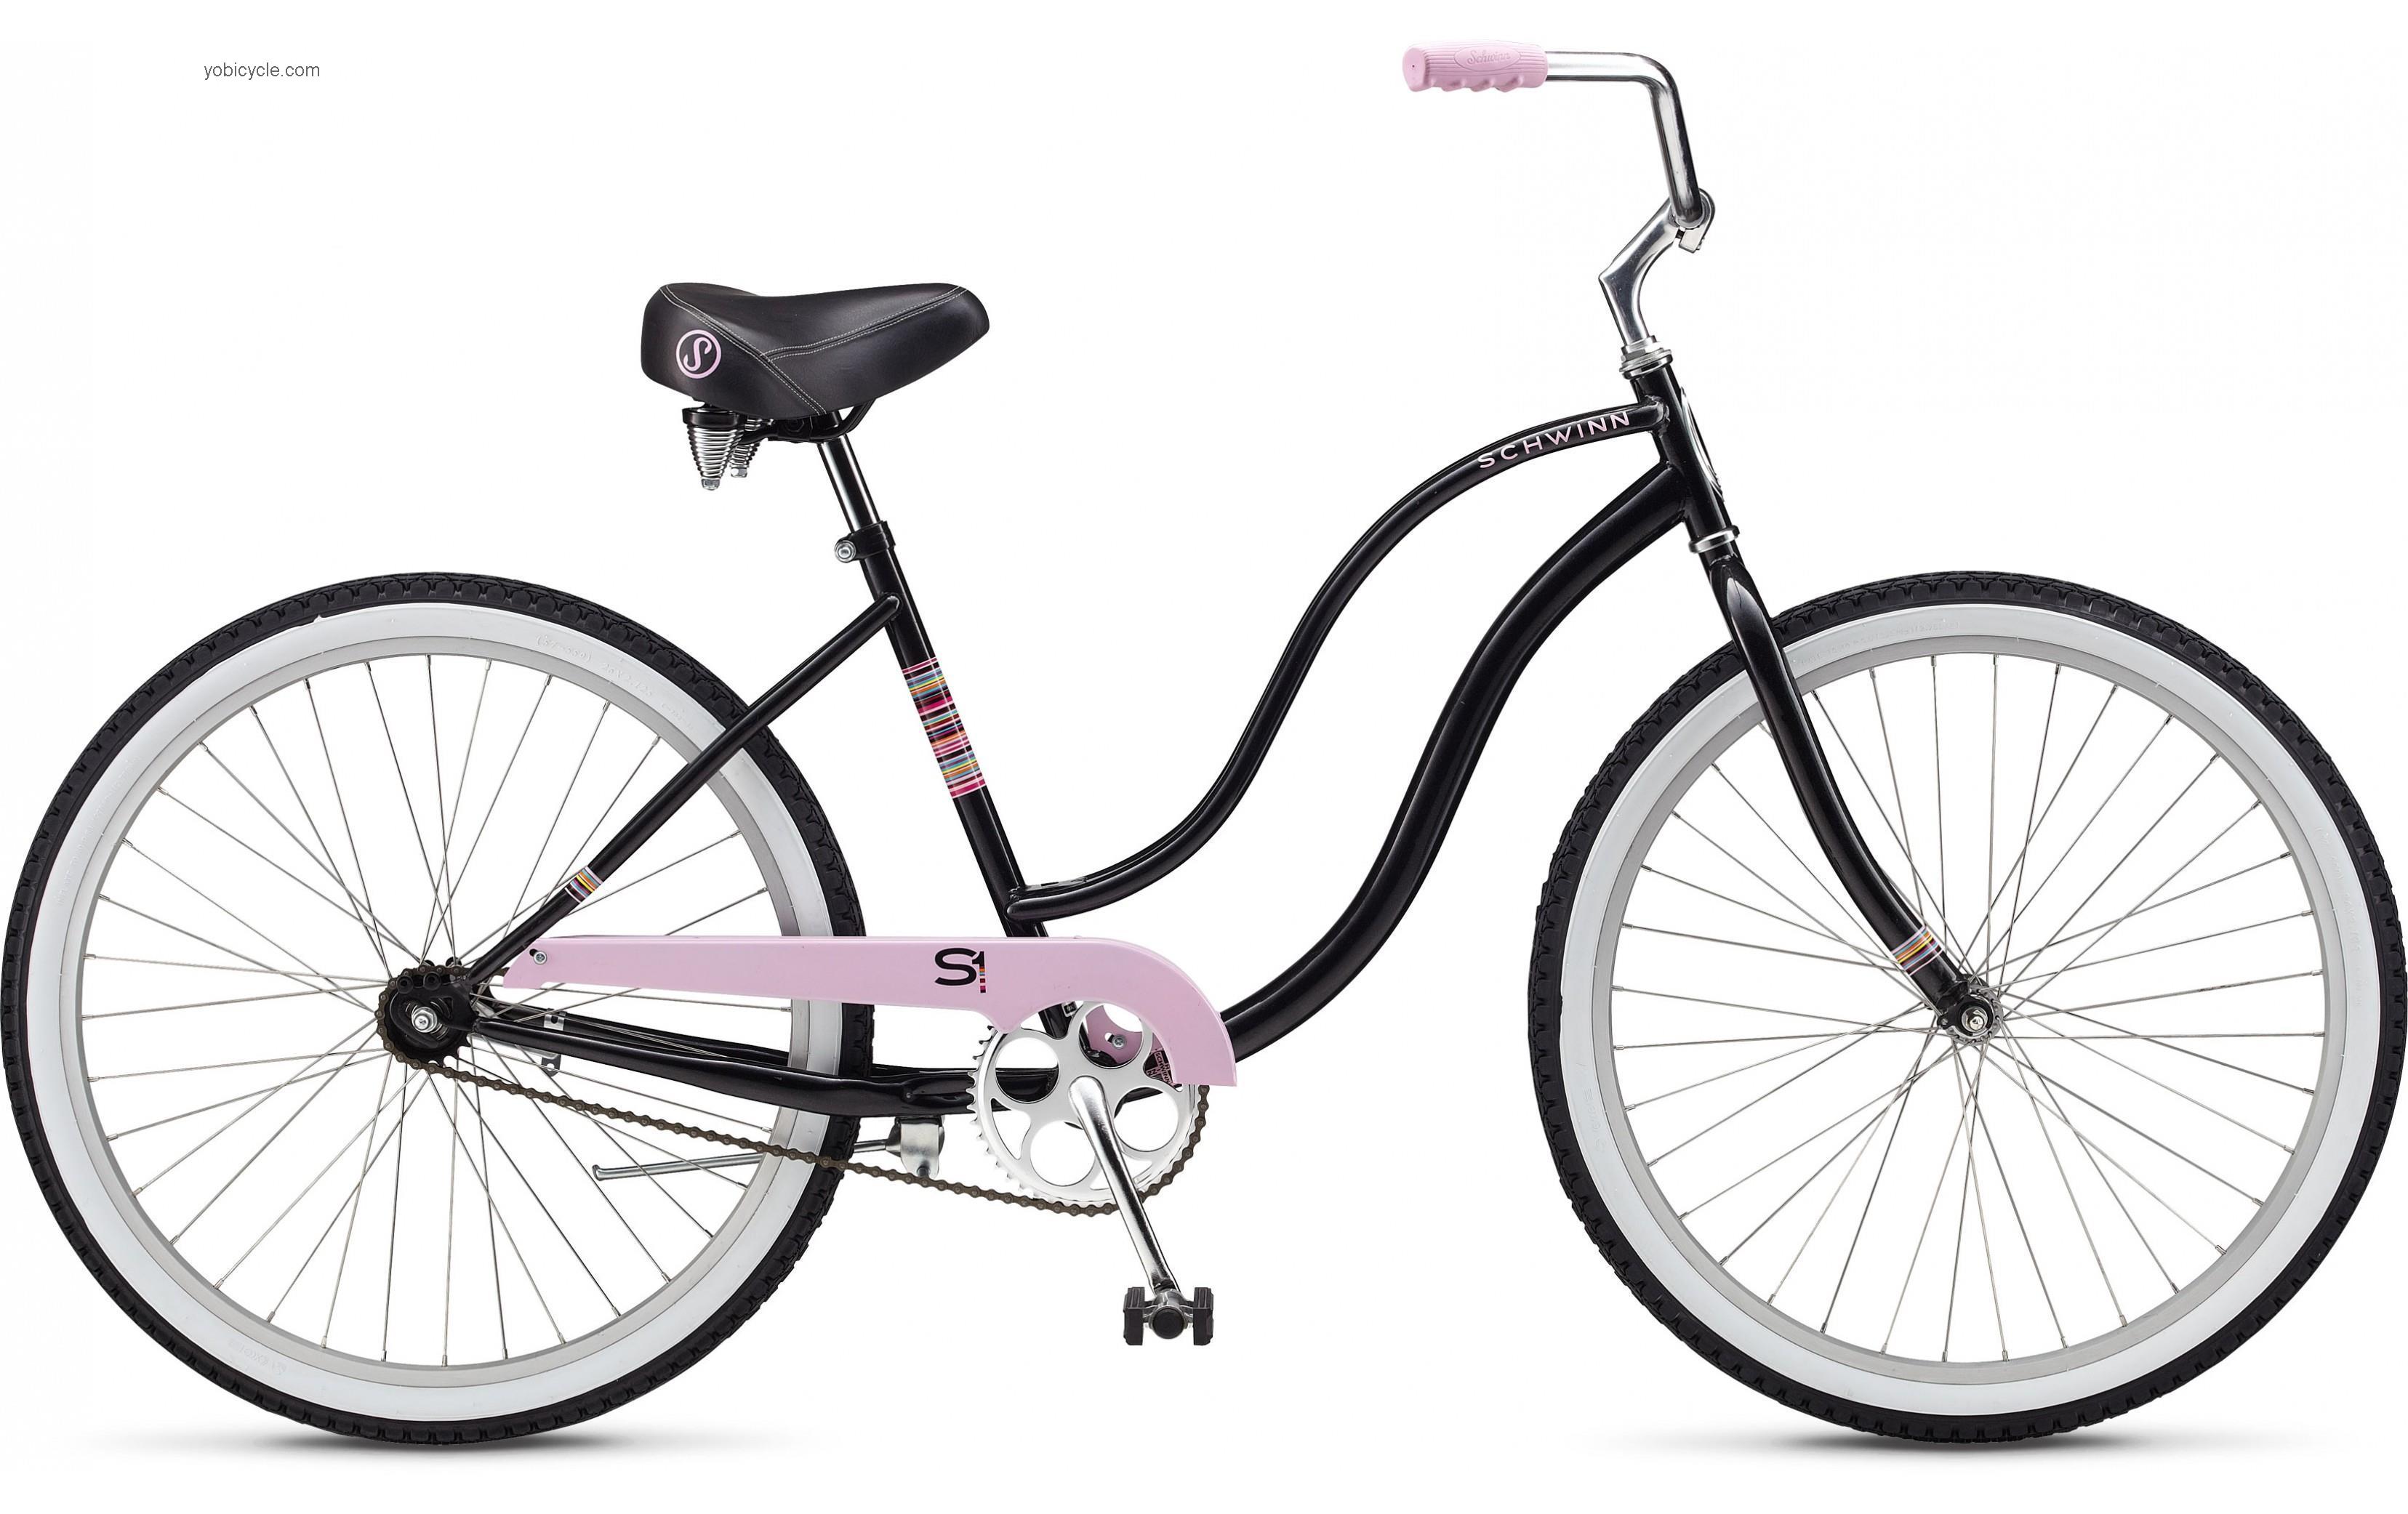 Schwinn S1 competitors and comparison tool online specs and performance